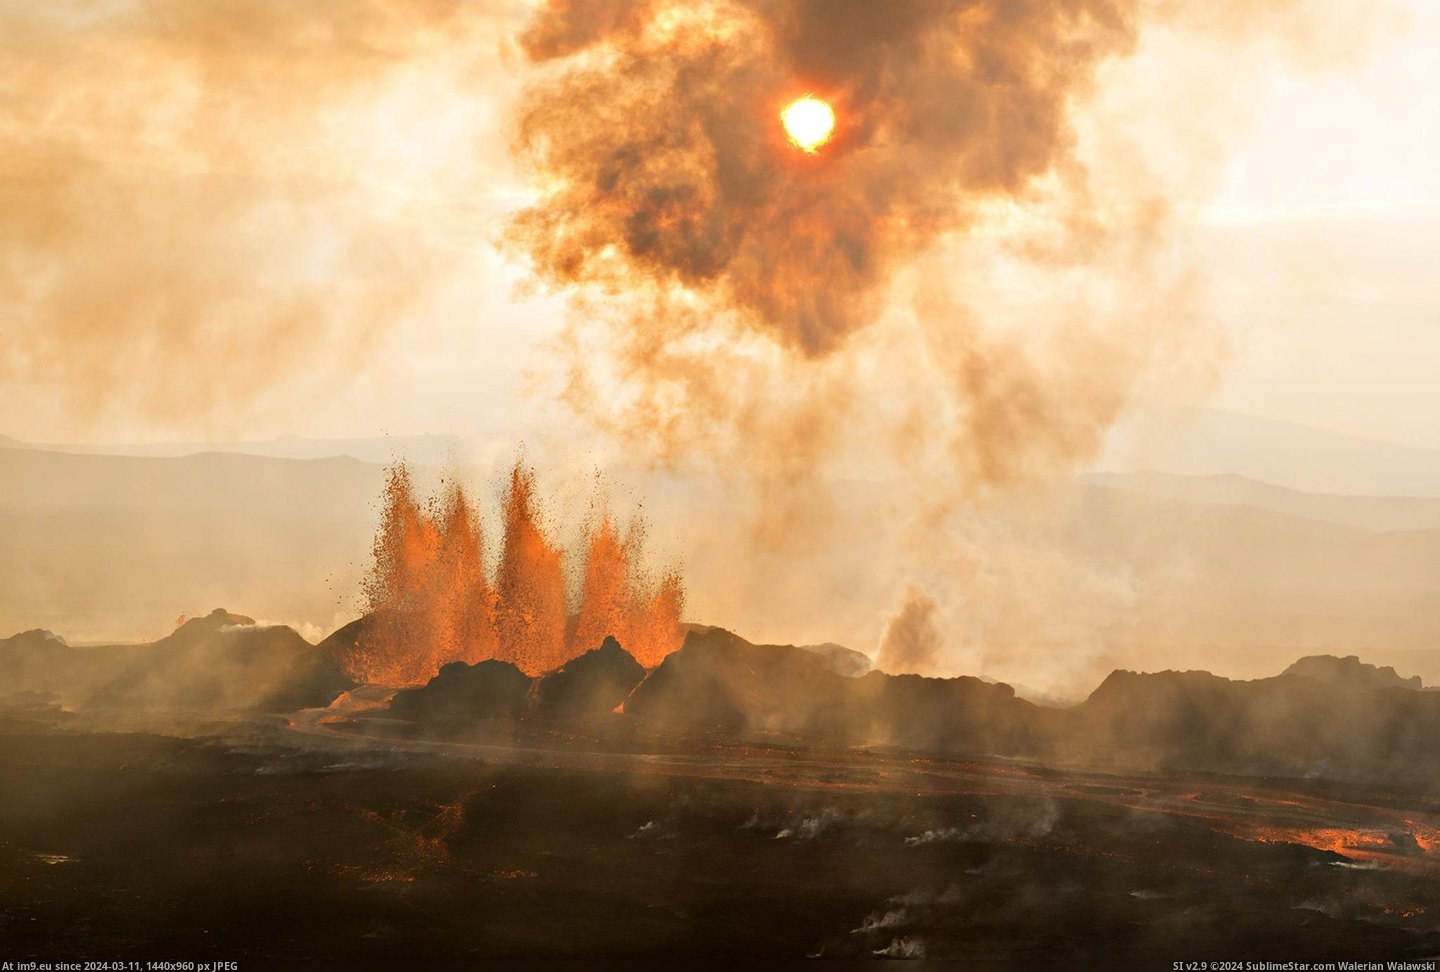 #Photo #Iceland #Fissure #Haukur #Snorrason #Eruption #Holuhraun [Earthporn] Fissure eruption at Holuhraun, Iceland. Photo by Haukur Snorrason [2048x1378] Pic. (Image of album My r/EARTHPORN favs))